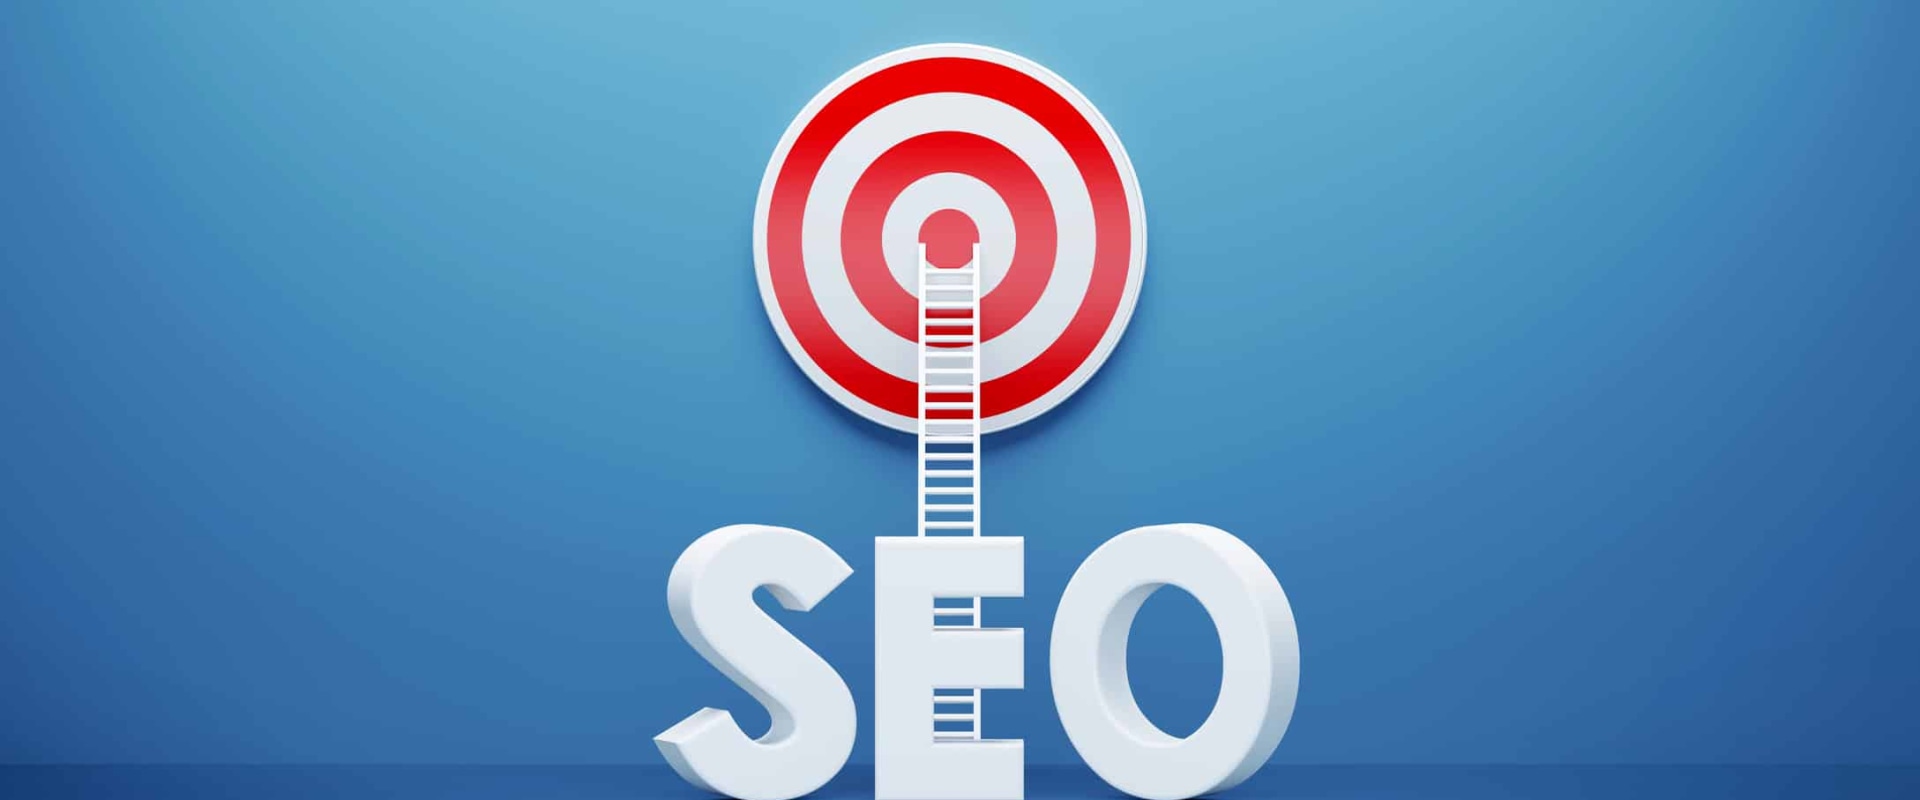 Why is seo important seo?